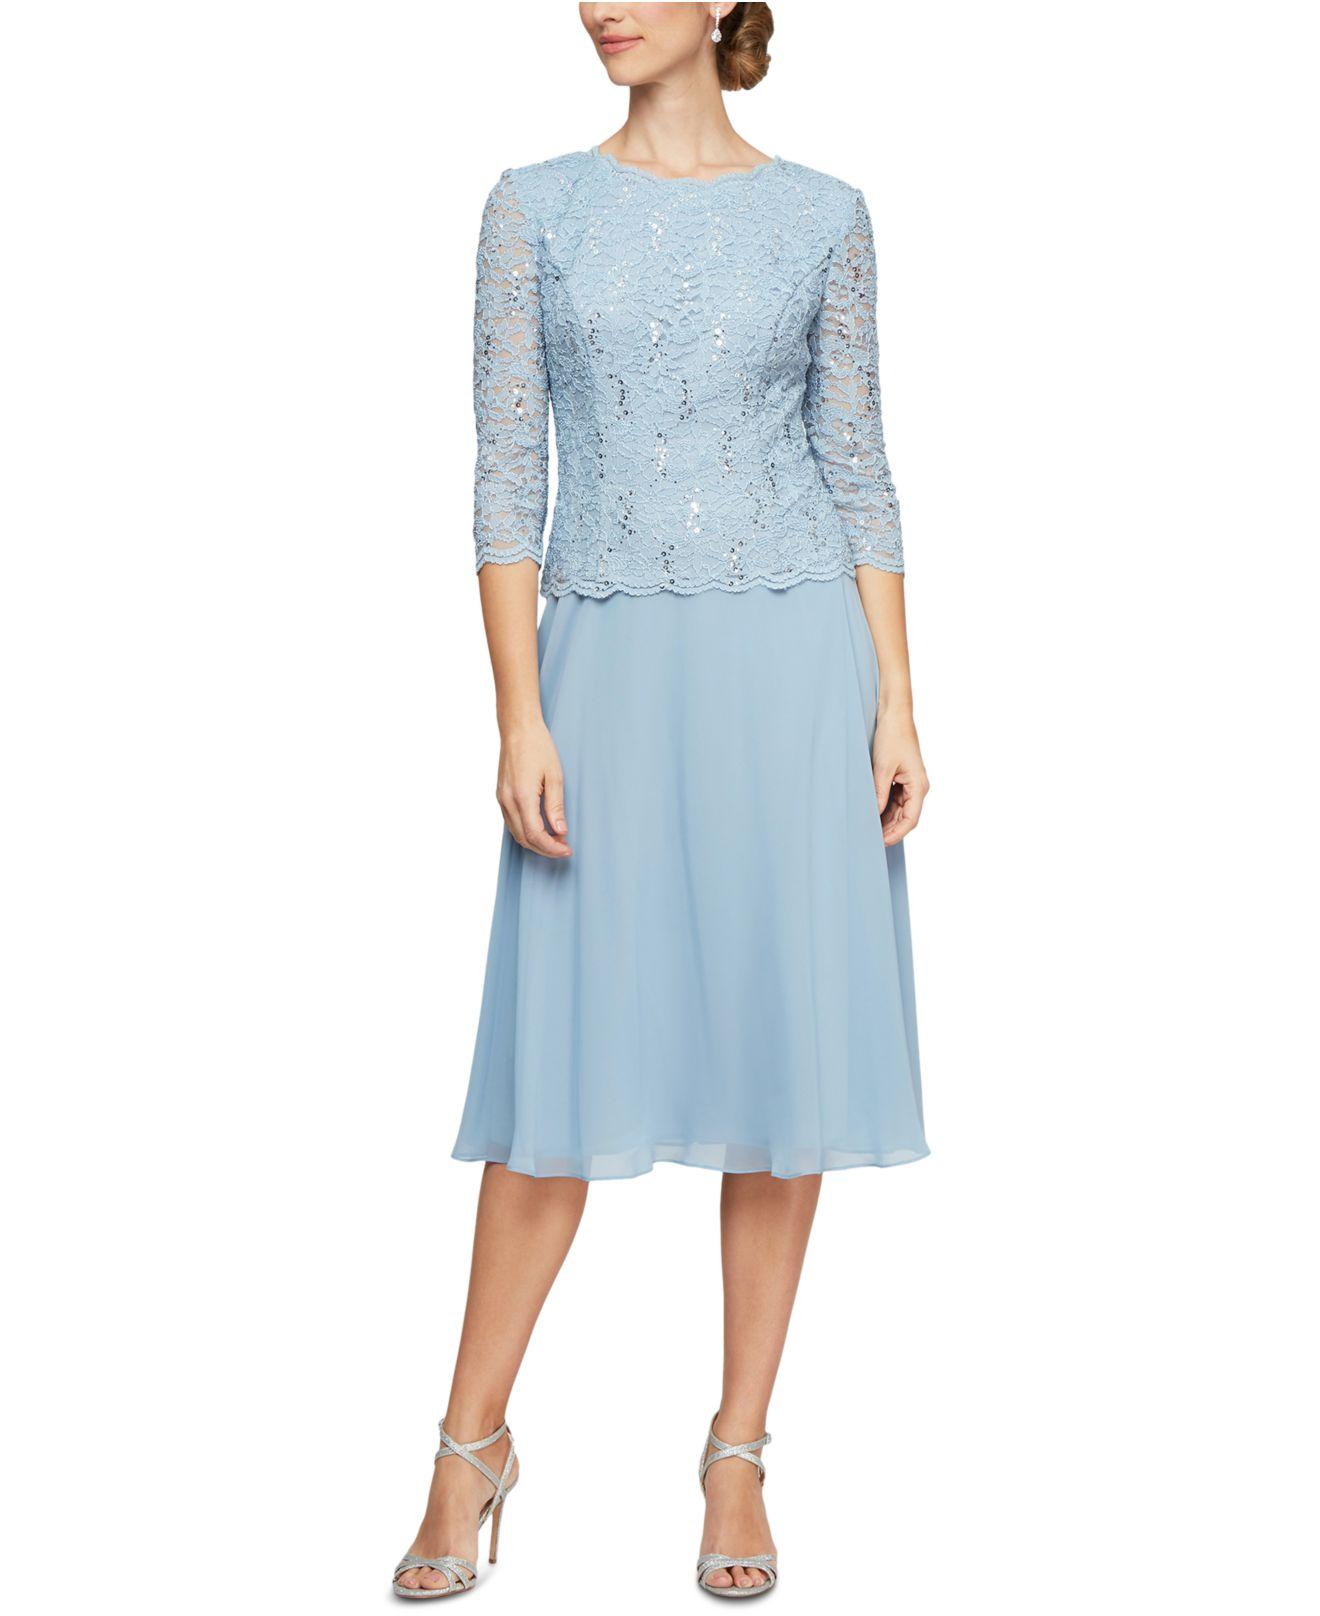 Alex Evenings Sequined Lace Contrast Dress in Sky Blue (Blue) - Lyst